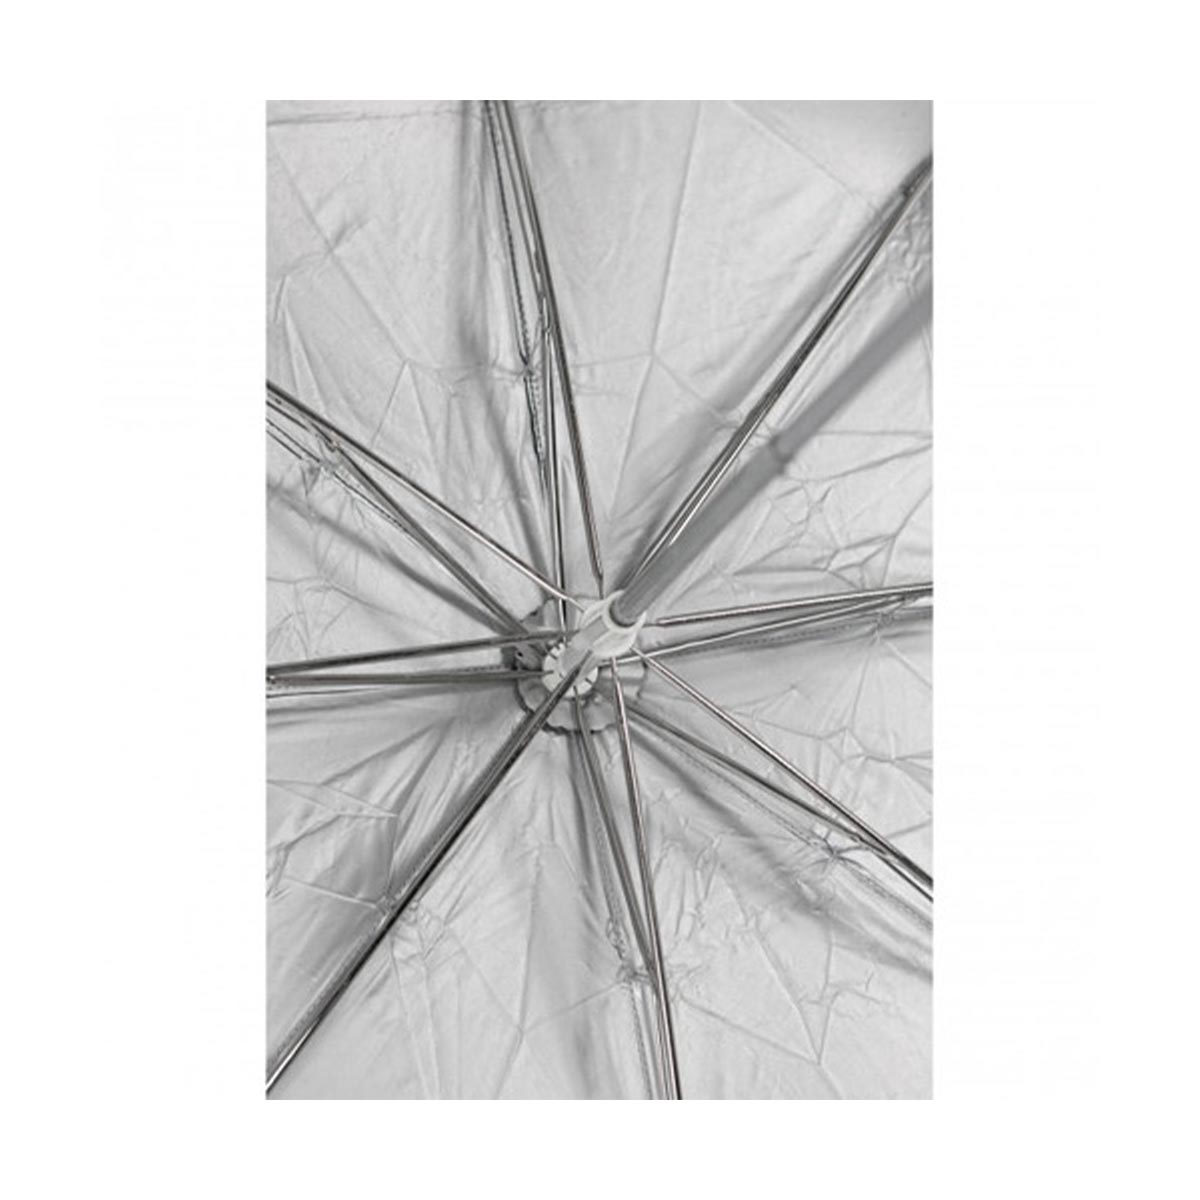 Westcott 43" Soft Silver Bounce Collapsible Umbrella